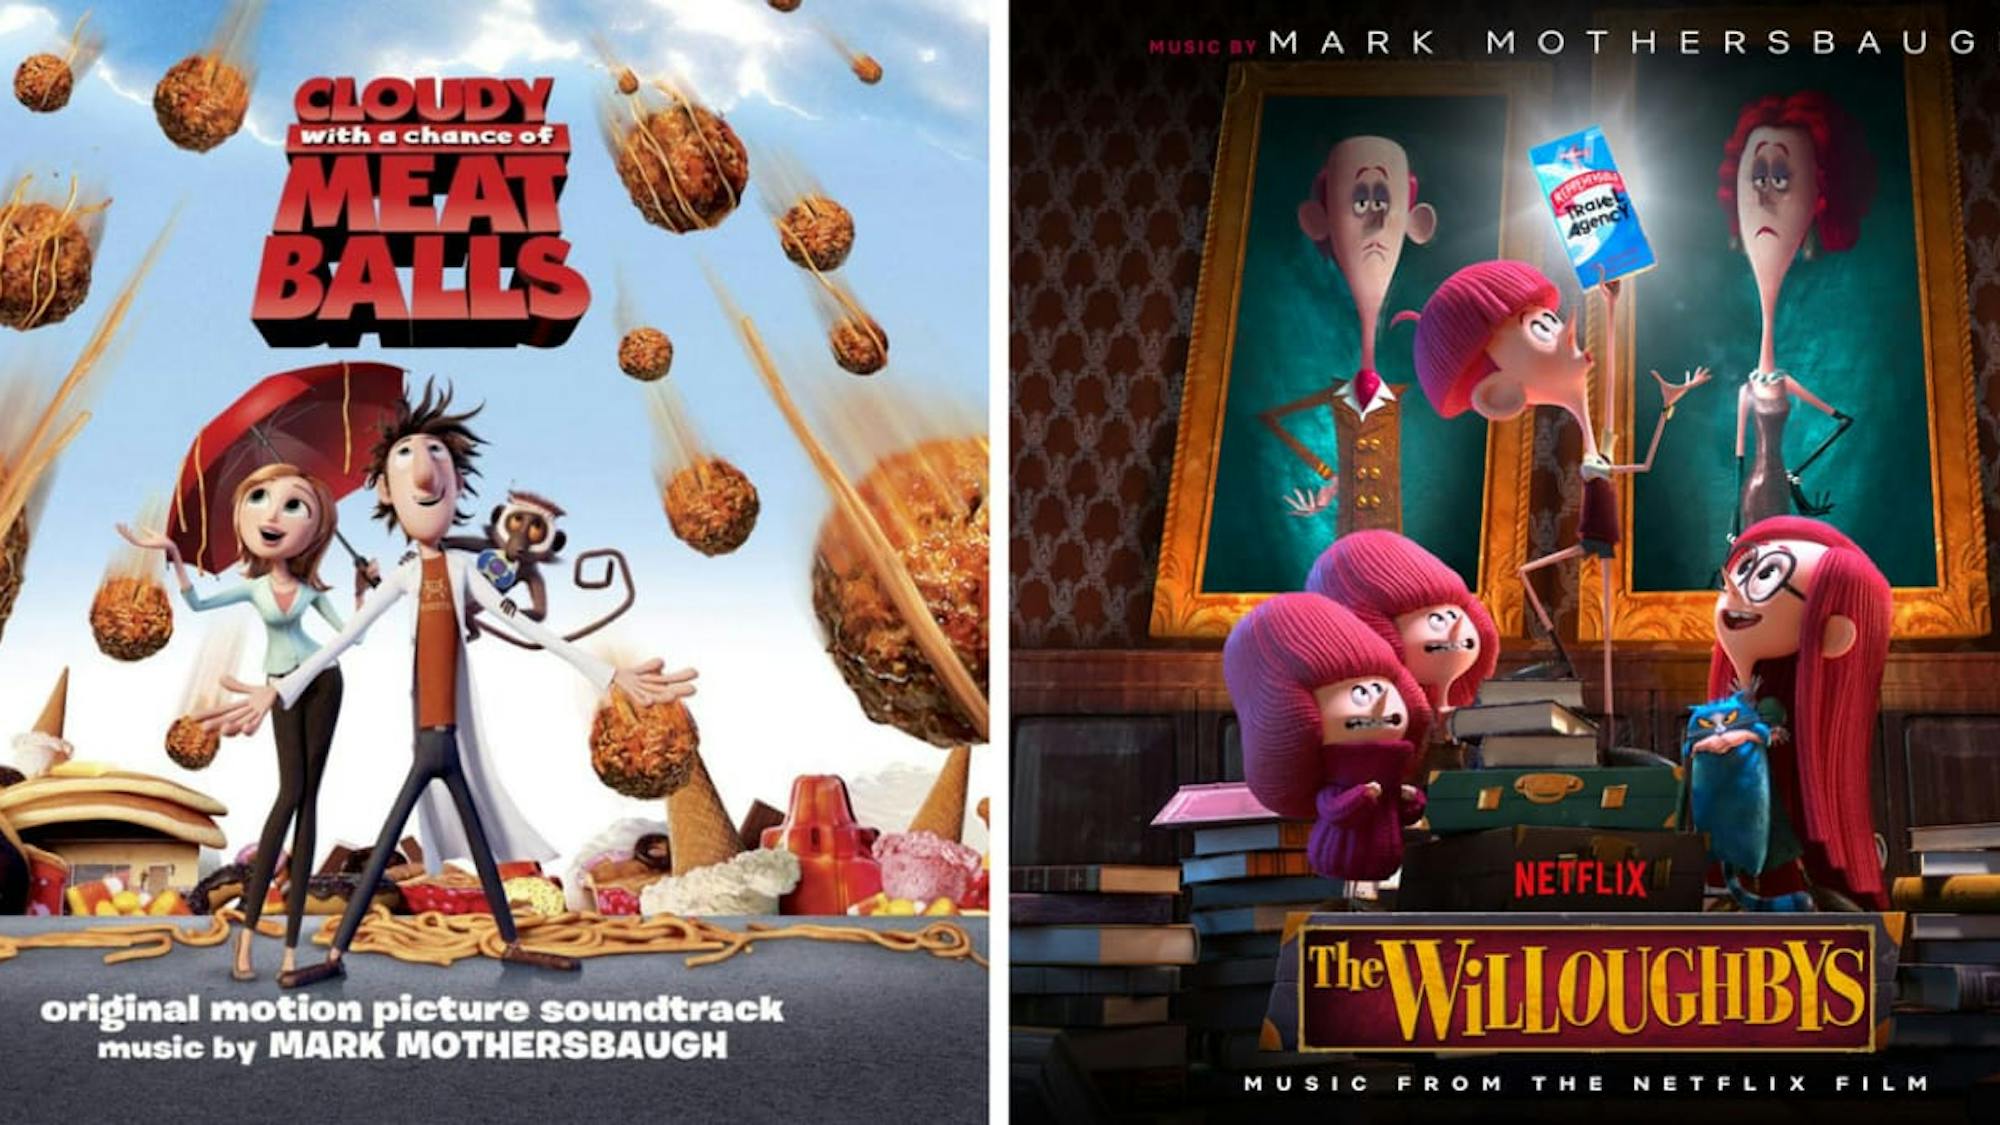 Mark Mothersbaugh’s albums for Cloudy with a Chance of Meatballs and The Willoughbys